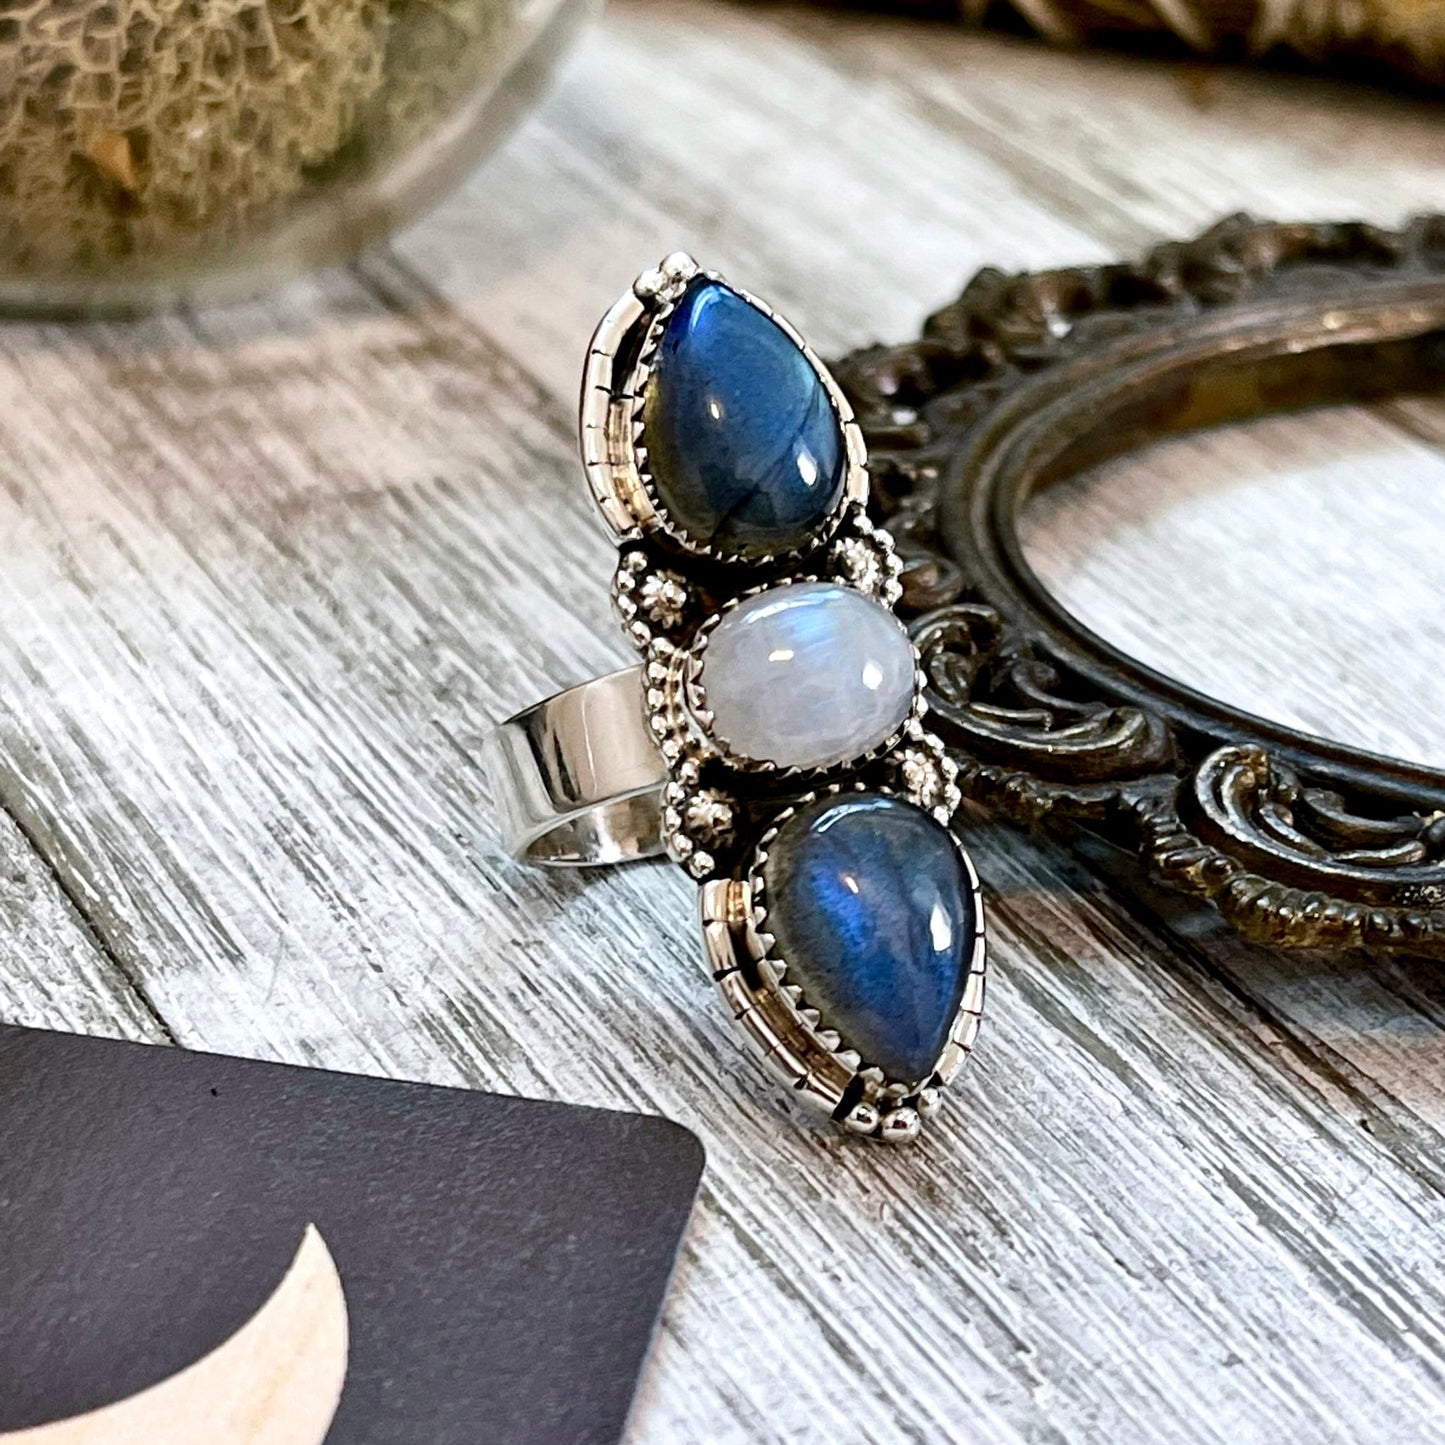 3 Stone Ring, Adjustable Ring, Big Crystal Ring, Big Stone Ring, Bohemian Ring, Boho Jewelry, Boho Ring, Etsy ID: 1333722547, Festival Jewelry, Foxlark- Rings, Gift For Woman, Jewelry, Labradorite Ring, Rainbow Moonstone, Rings, Statement Rings, Three Sto